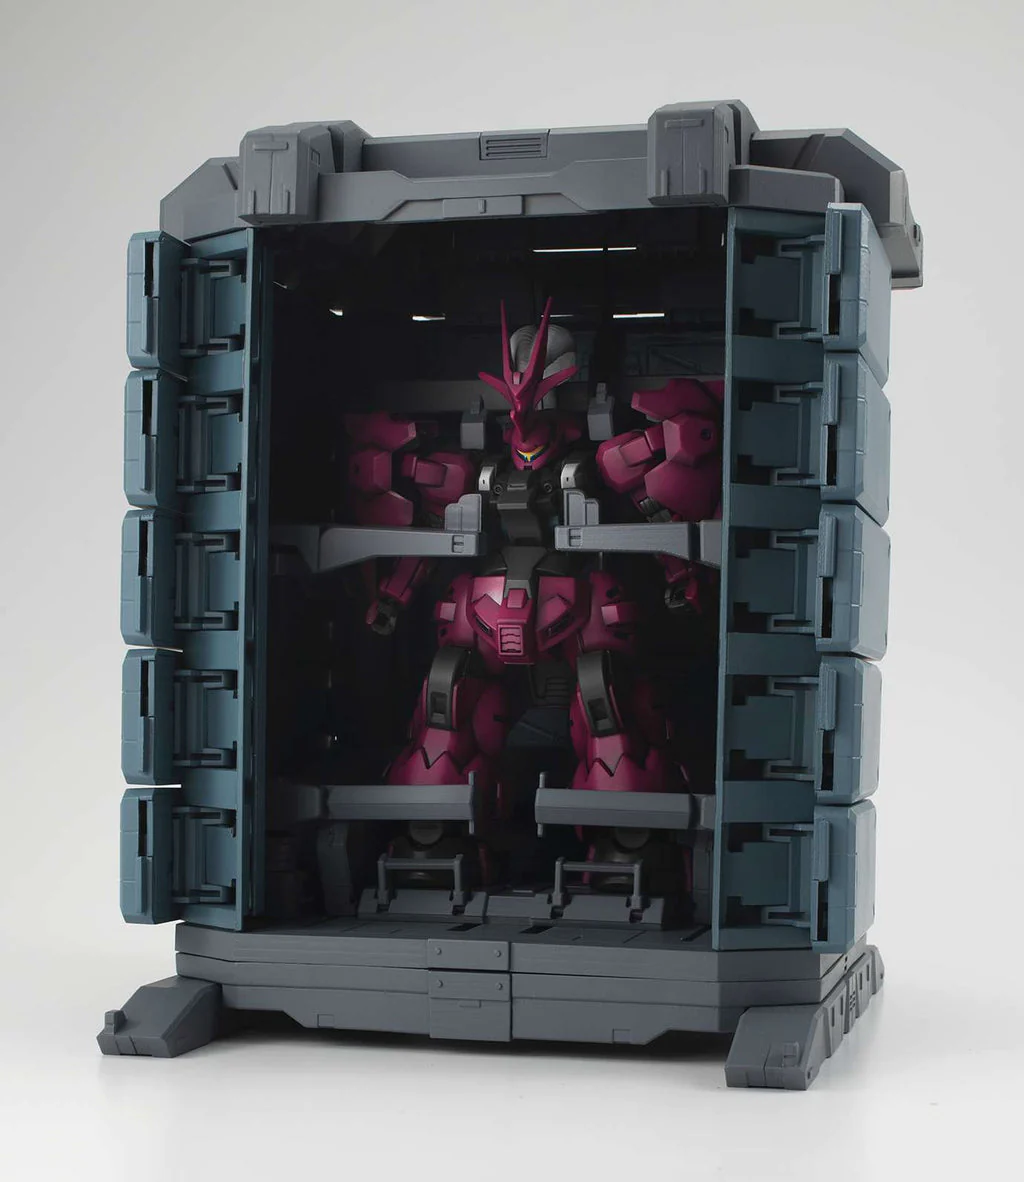 REALISTIC MODEL SERIES MS GUNDAM THE WITCH FROM MERCURY GS07-B MS CONTAINER (MATERIAL COLOR ED.)